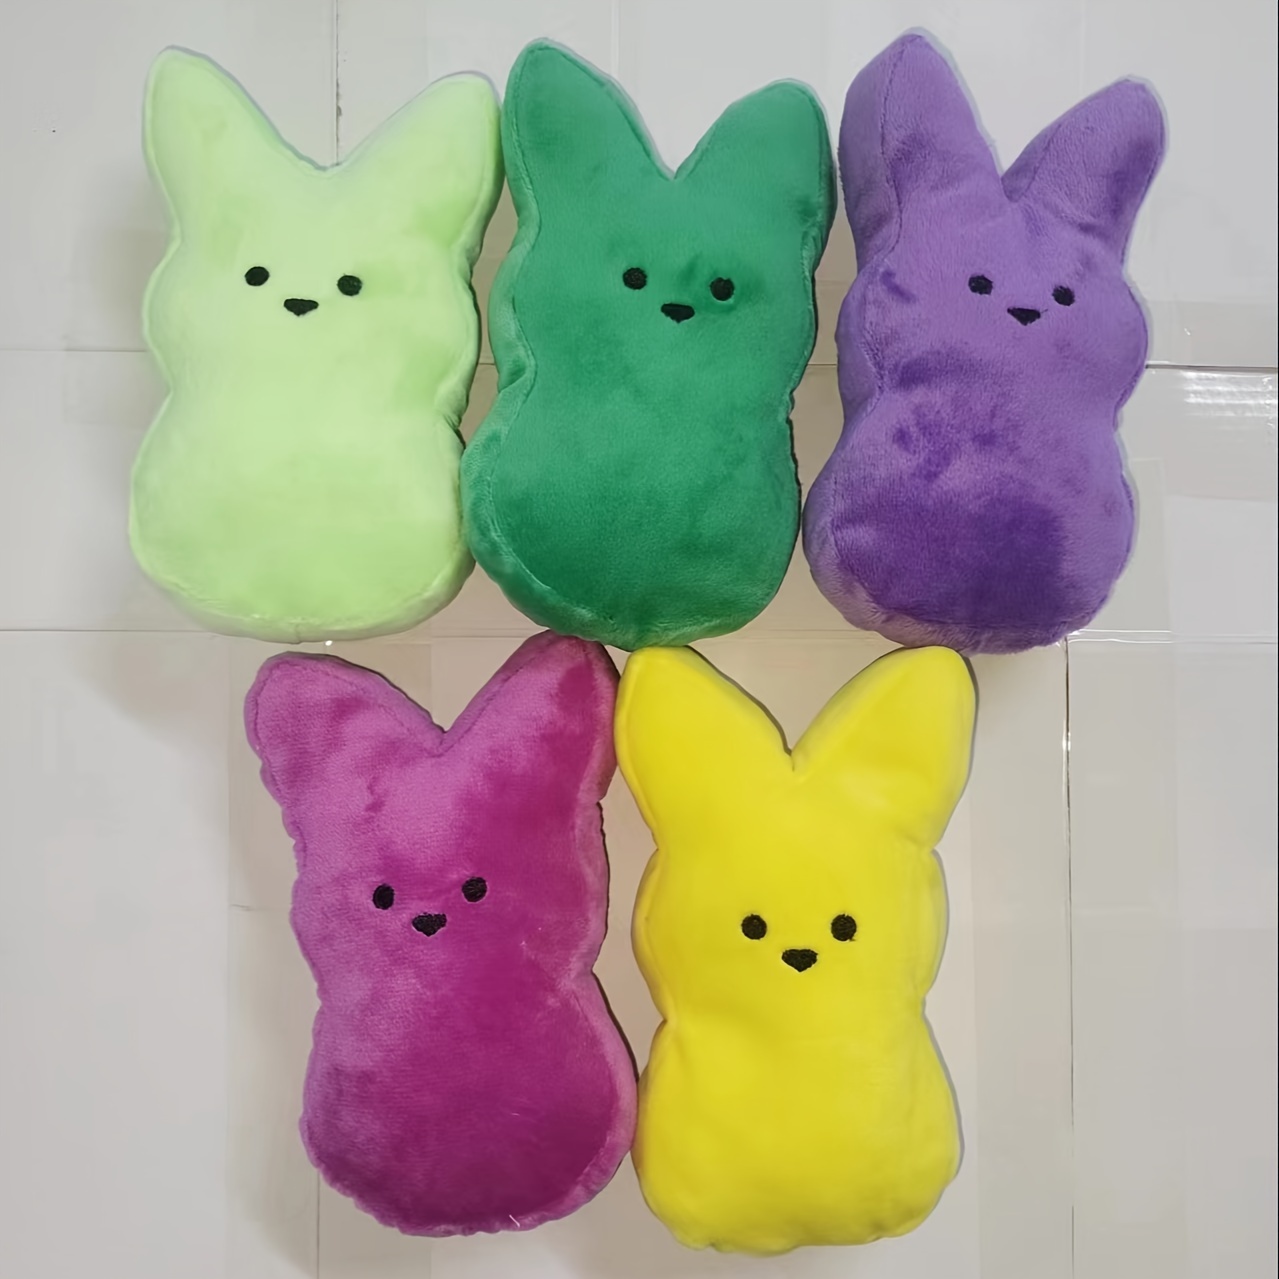 2 5pcs easter cute stuffed animal rabbit stuffed doll toys school season class gifts easter egg basket stuffing party birthday best gift to each other multi color mixed hair